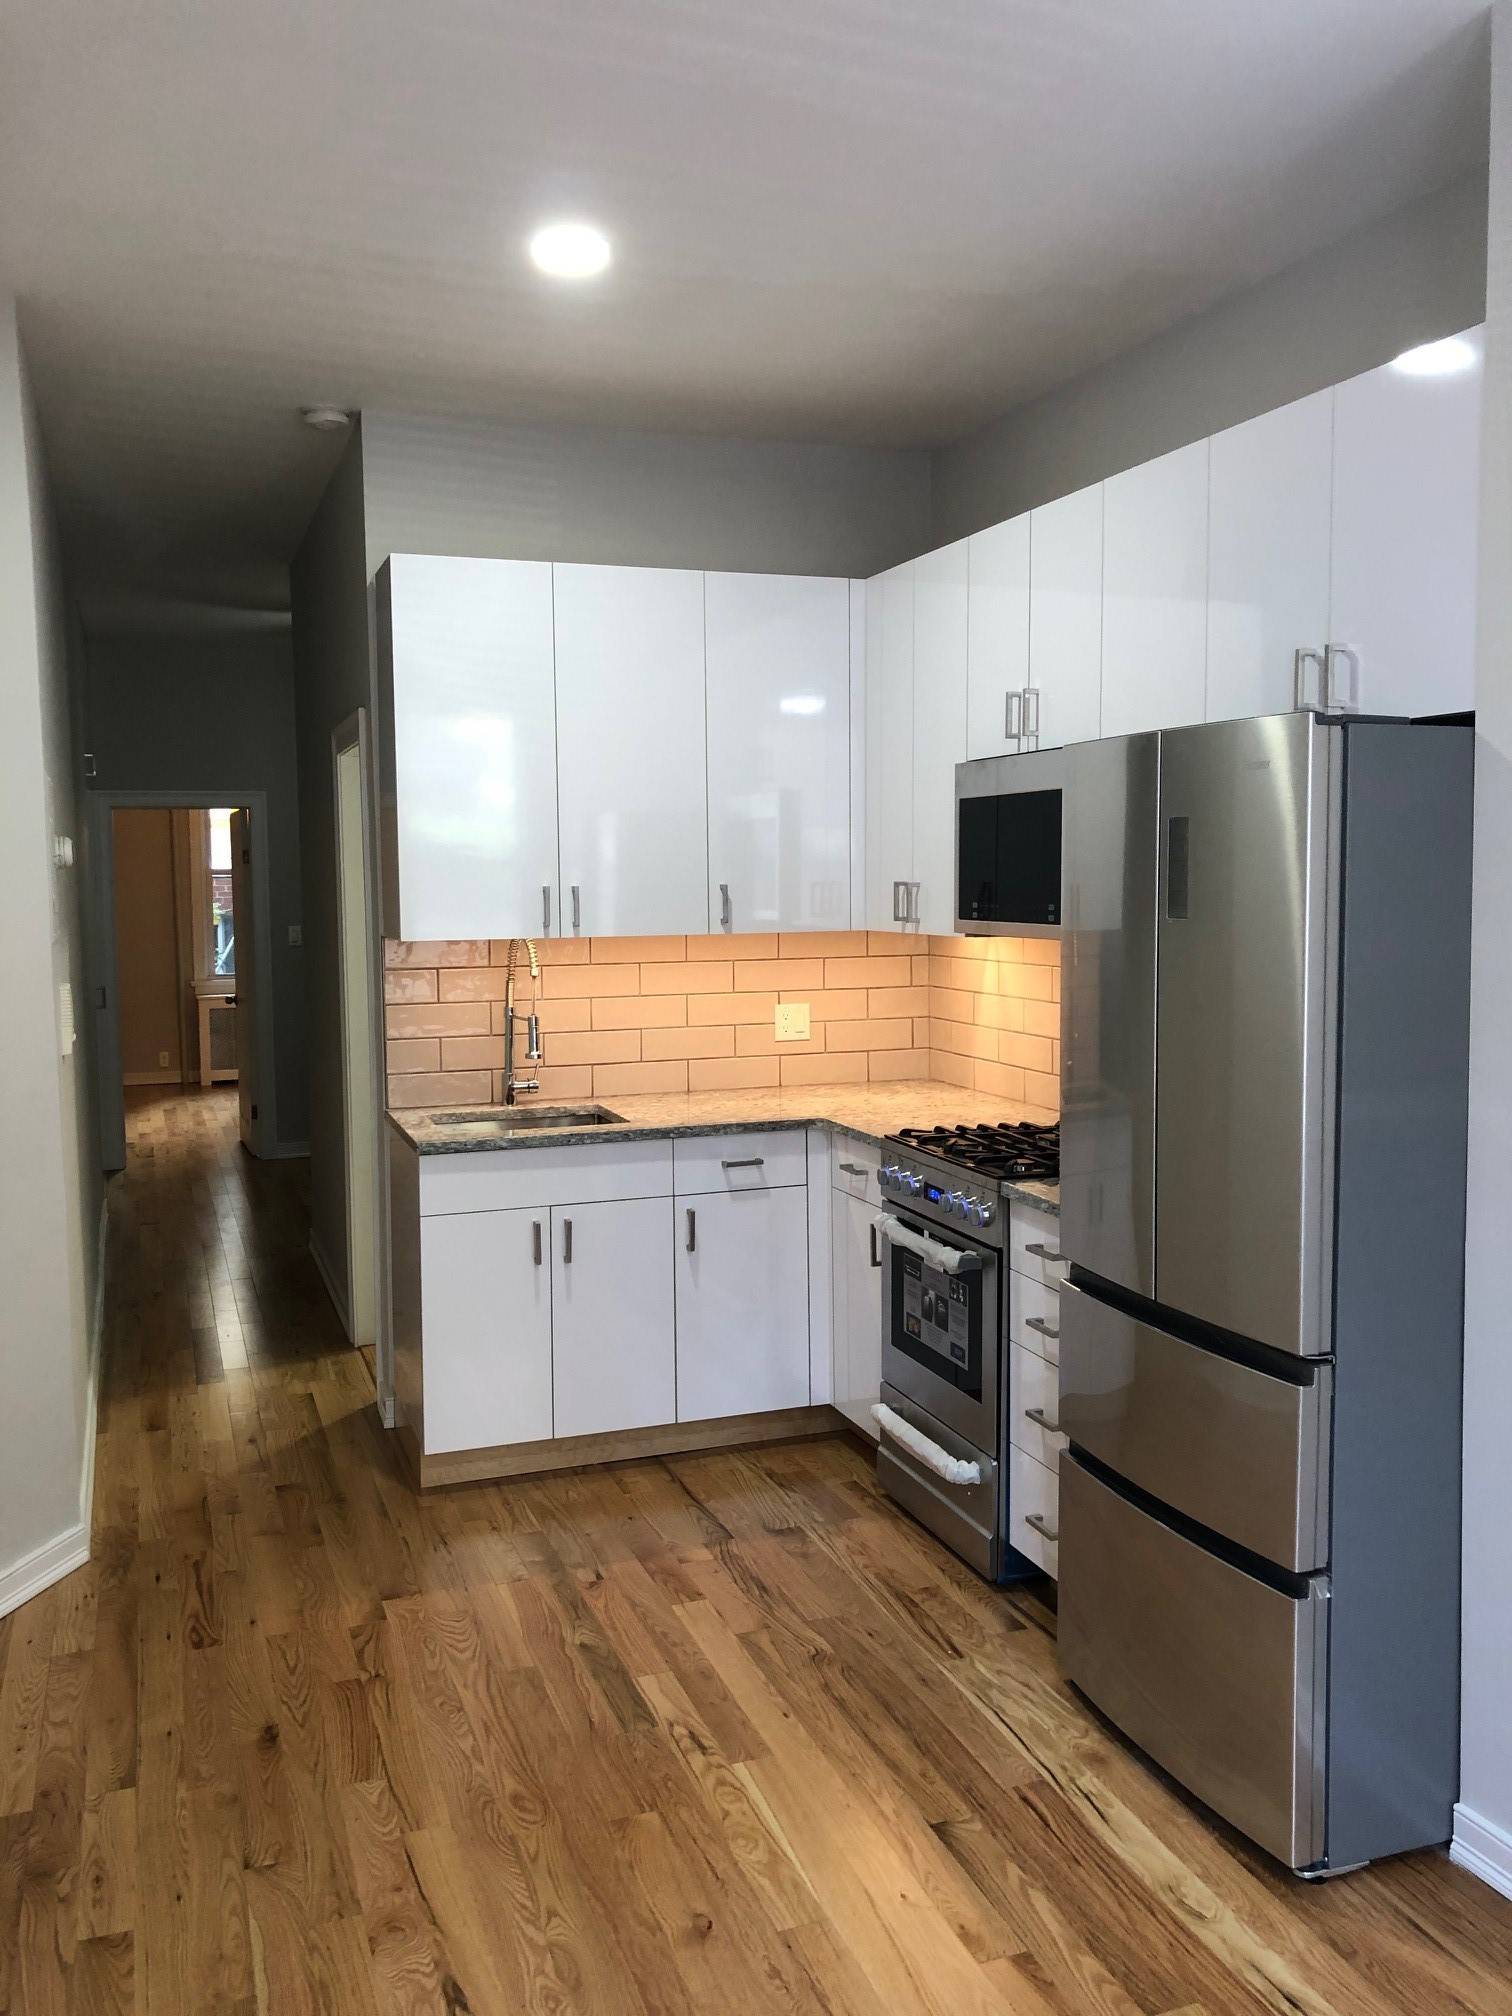 Renovated 1 Bedroom Apartment on a Tree Lined Street in the Heart of Greenpoint!